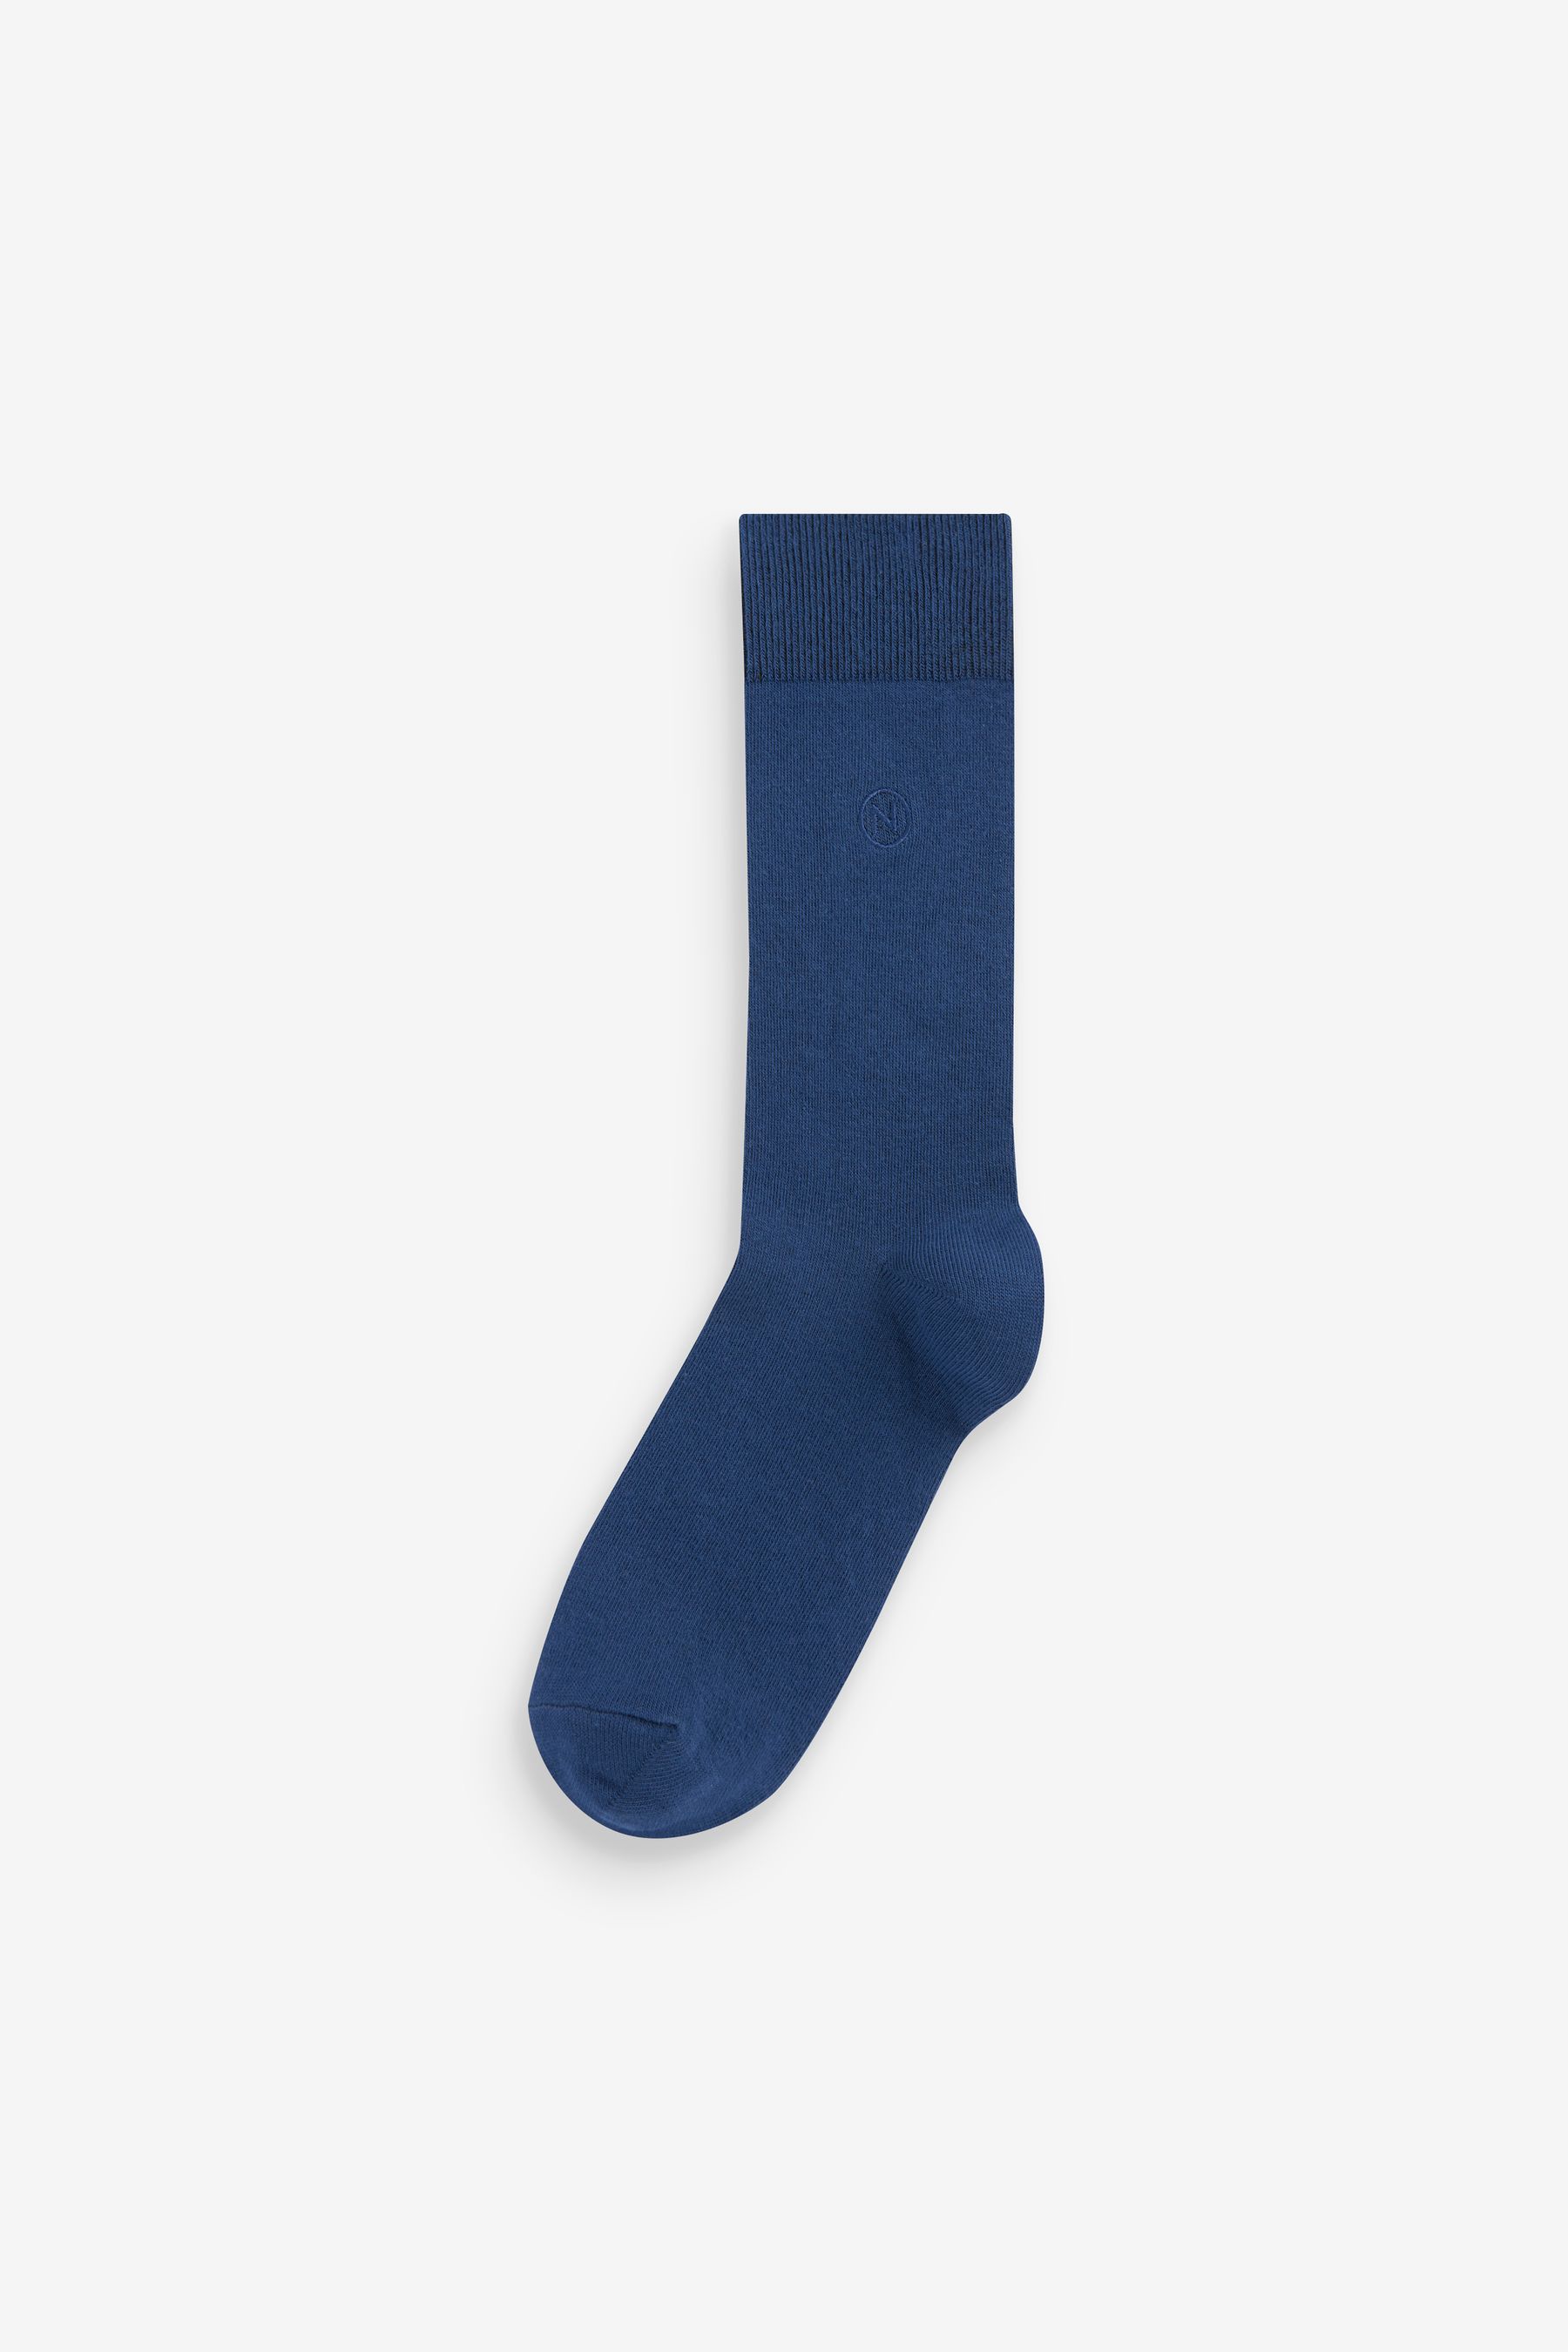 Buy Blue/Navy 5 Pack Embroidered Lasting Fresh Socks from the Next UK ...